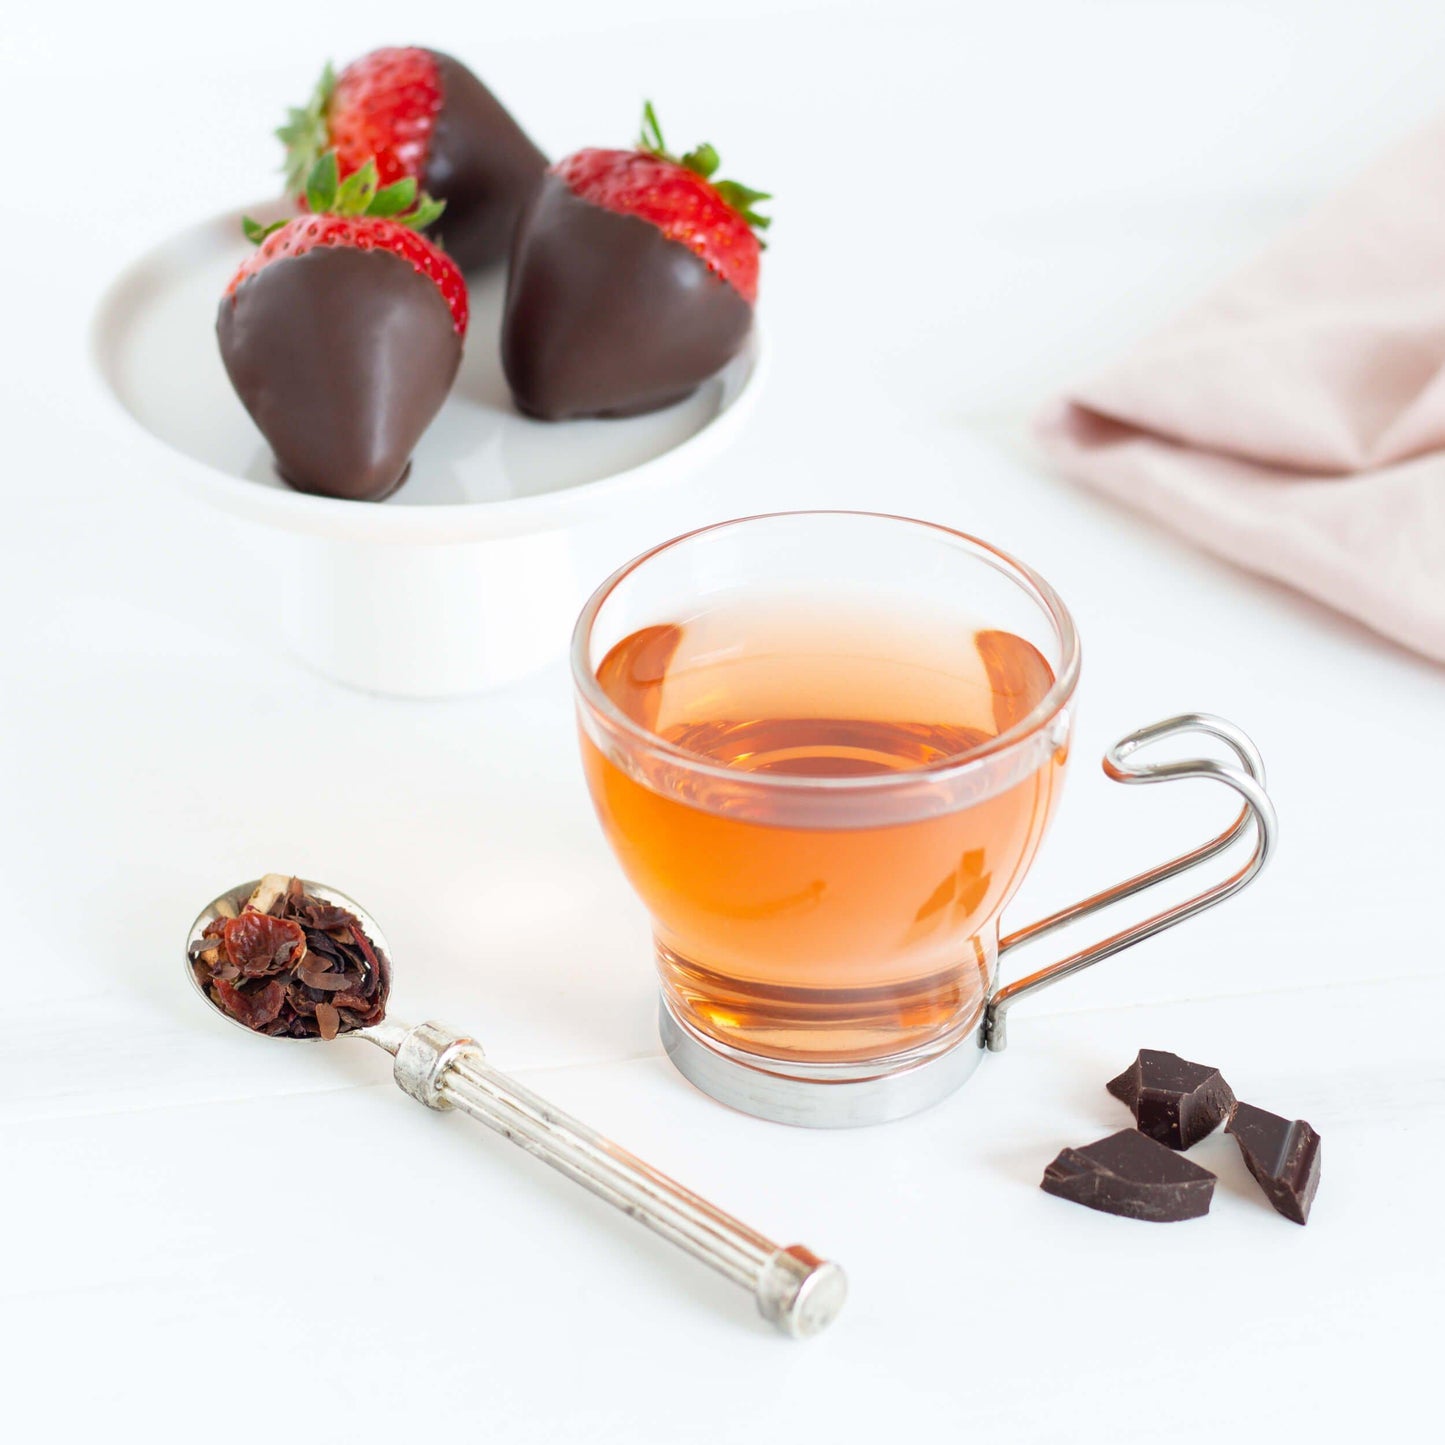 Chocolate Strawberry Organic Herbal Tea shown as brewed tea in a glass mug with a metal handle. A dish with three chocolate-covered strawberries is in the background. A spoon of tea leaves and few pieces of chocolate are in the foreground